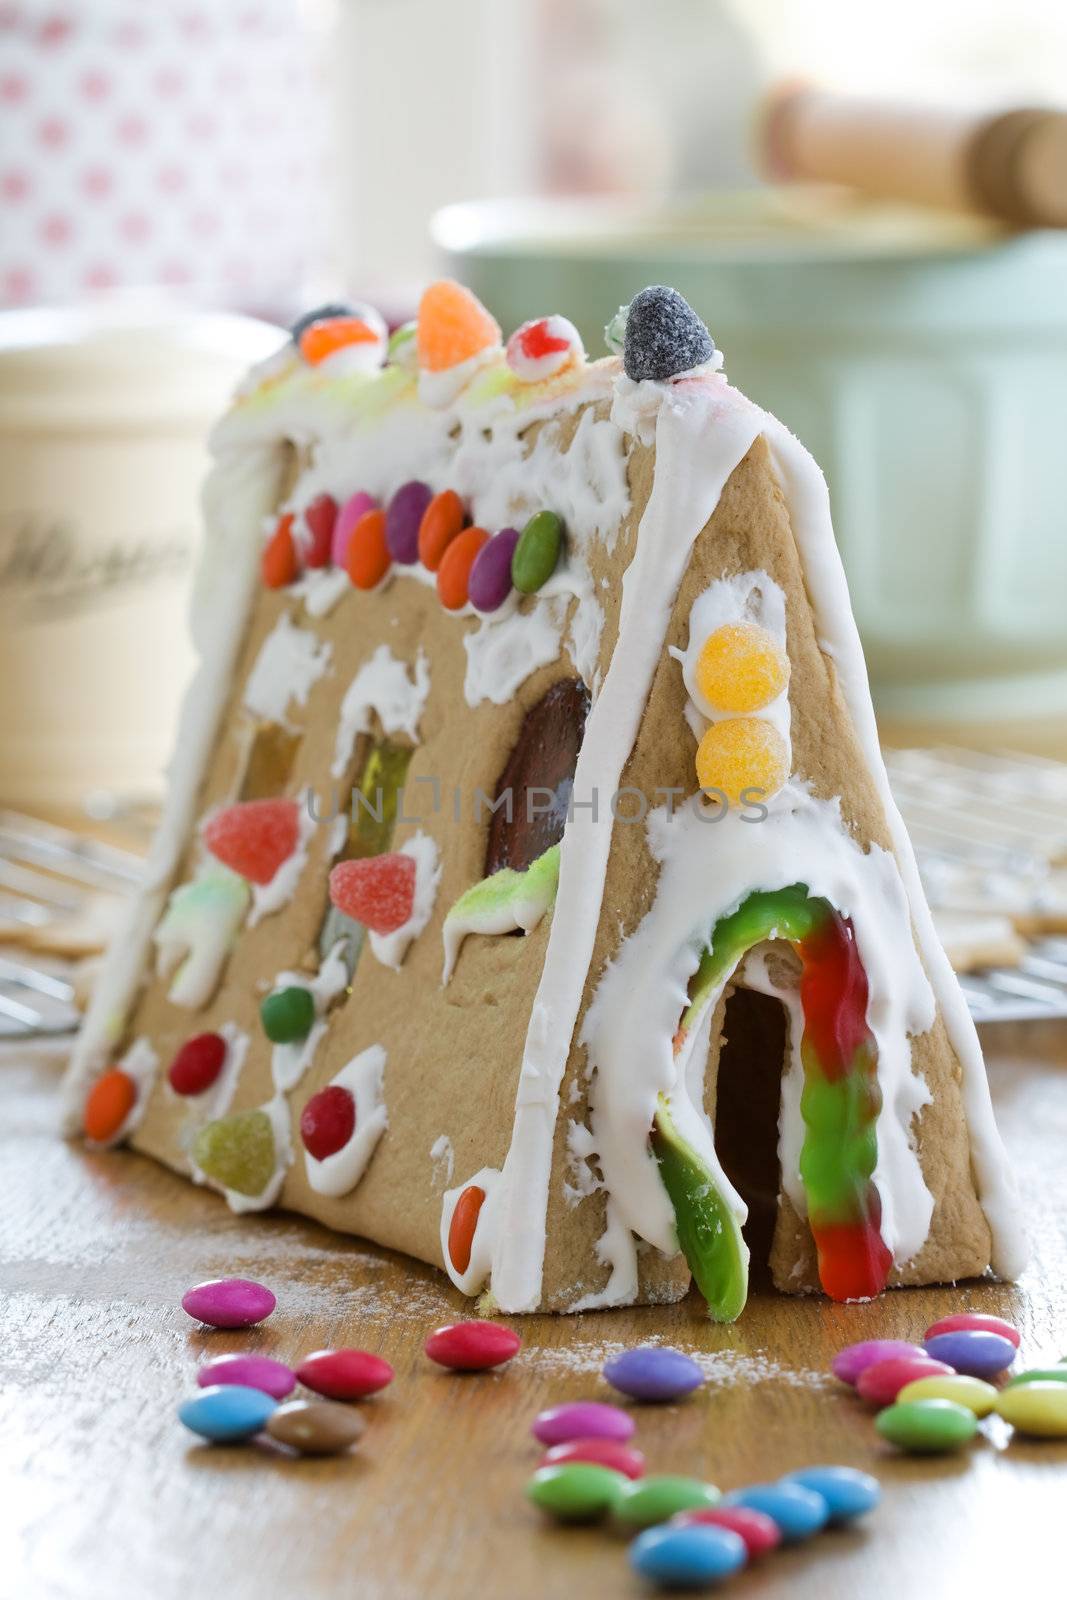 Gingerbread house by RuthBlack